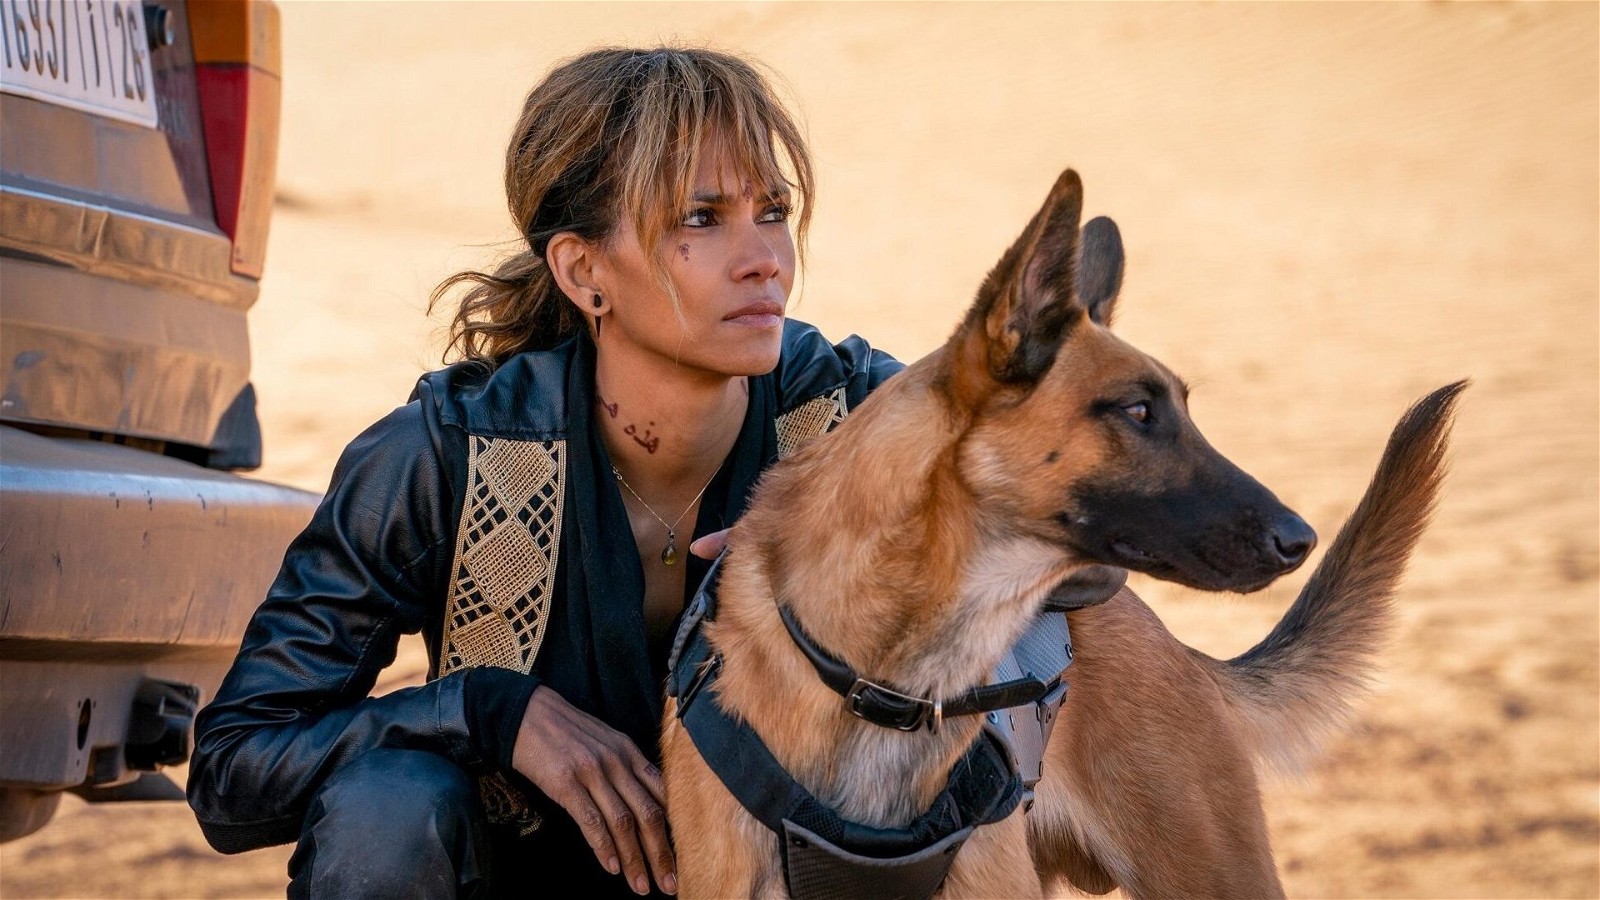 Halle Berry in John Wick: Chapter 3 - Parabellum